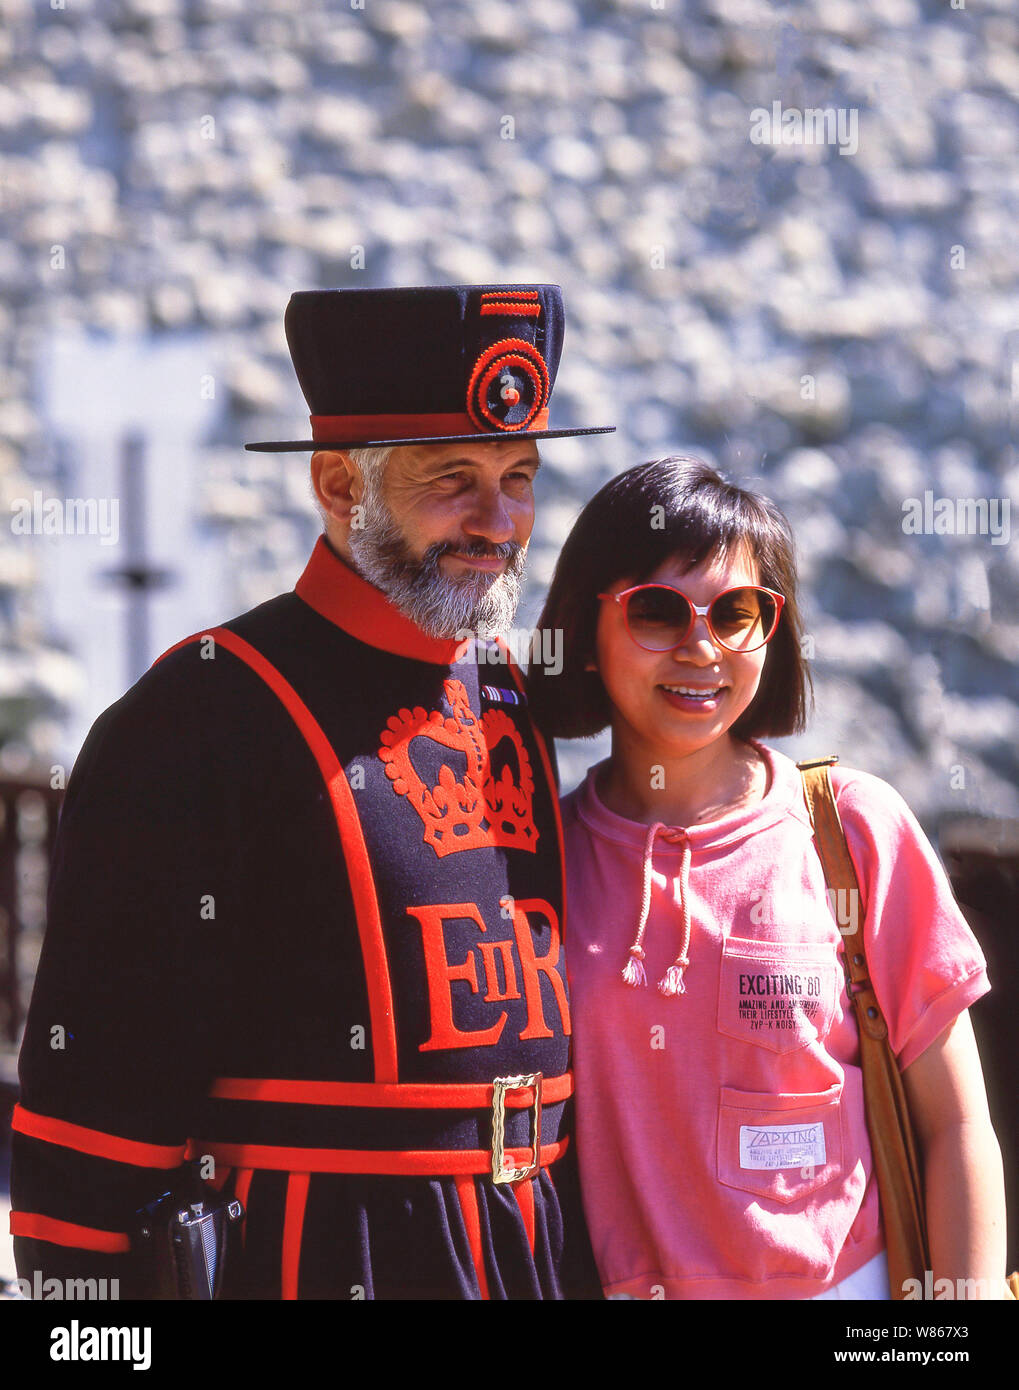 Beefeater (Yeomen Warder)  with Asian tourist, Tower of London, Tower Hill, The Borough of Tower Hamlets, Greater London, England, United Kingdom Stock Photo